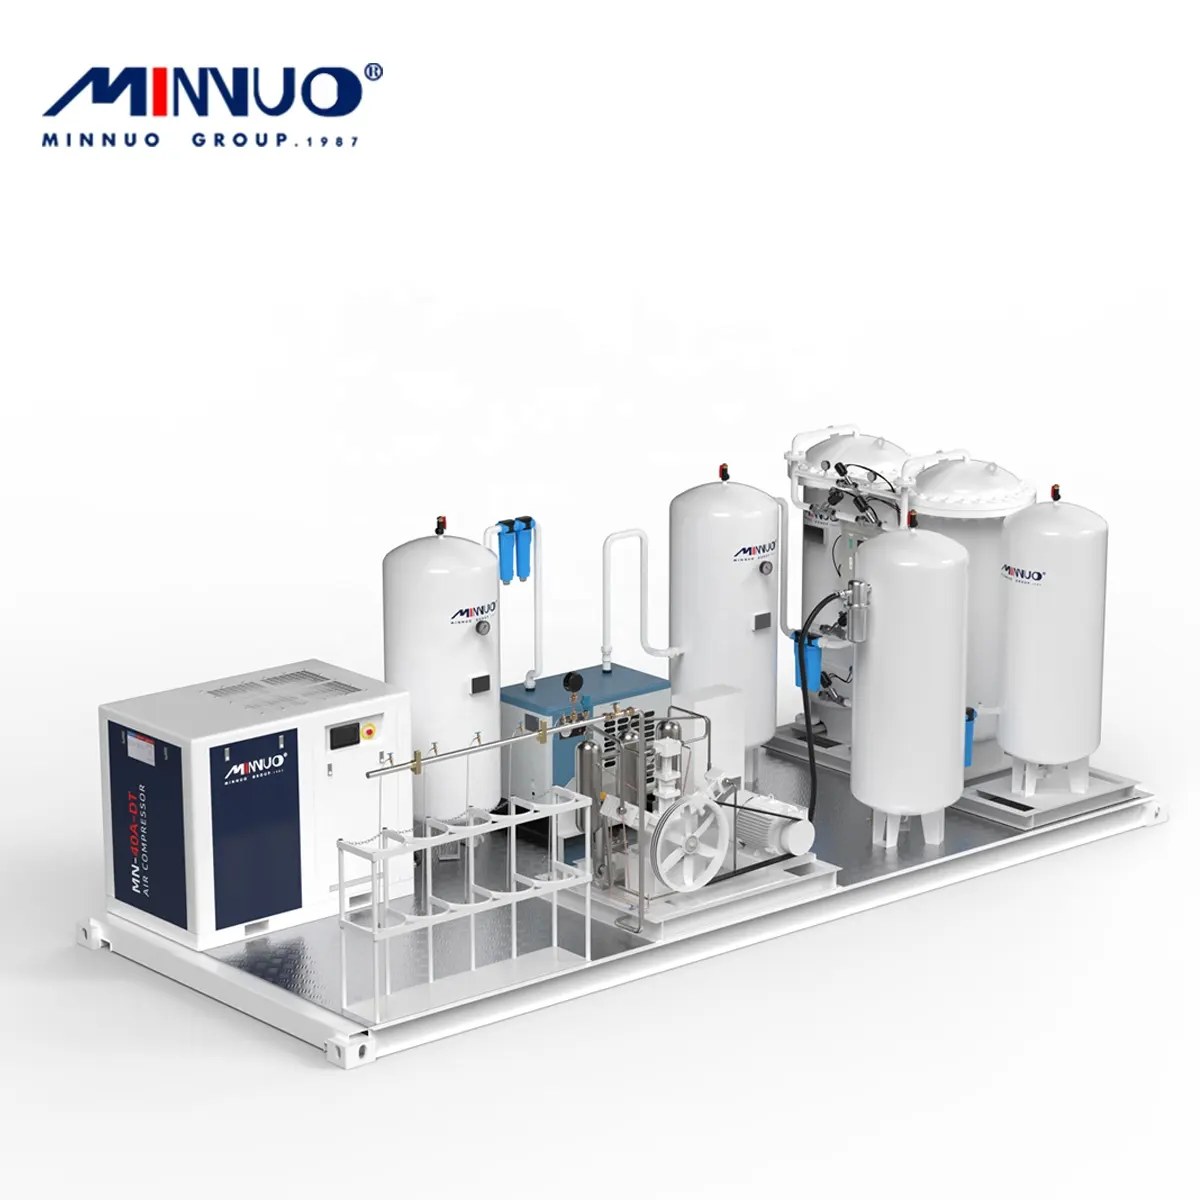 Reliable 99.95% mini oxygen plant high purity industrial oxygen generation new design in 2021